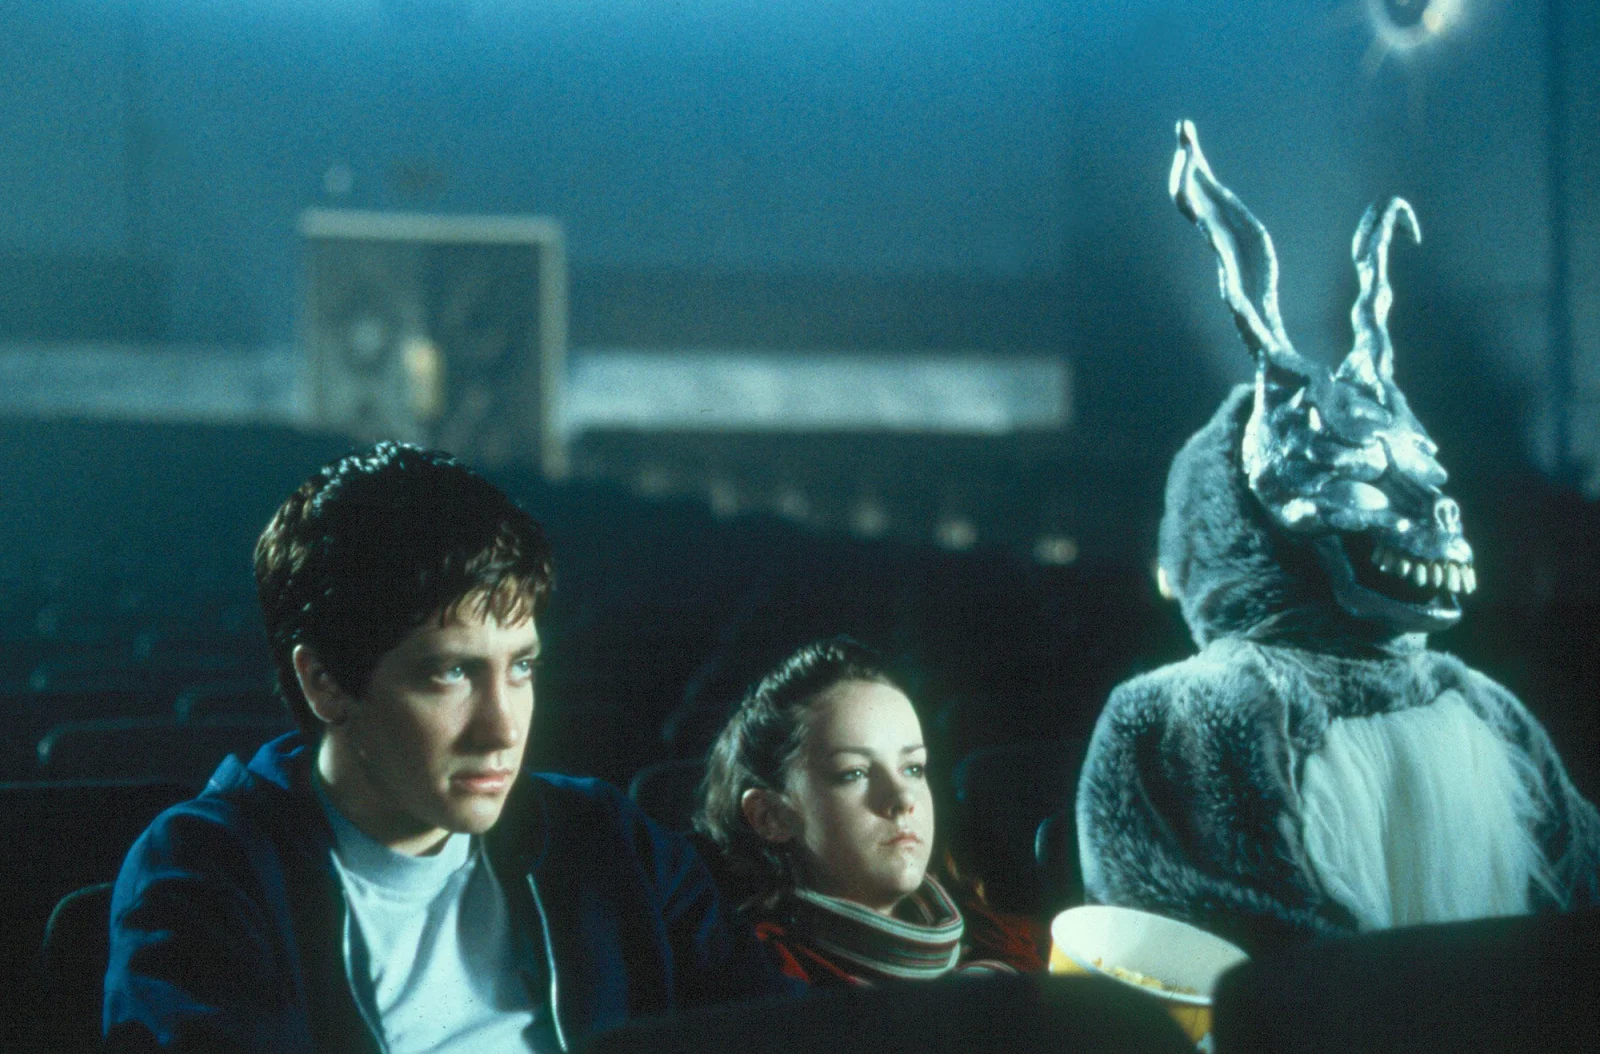 While I do agree that Donnie Darko is on the edge of horror and thriller